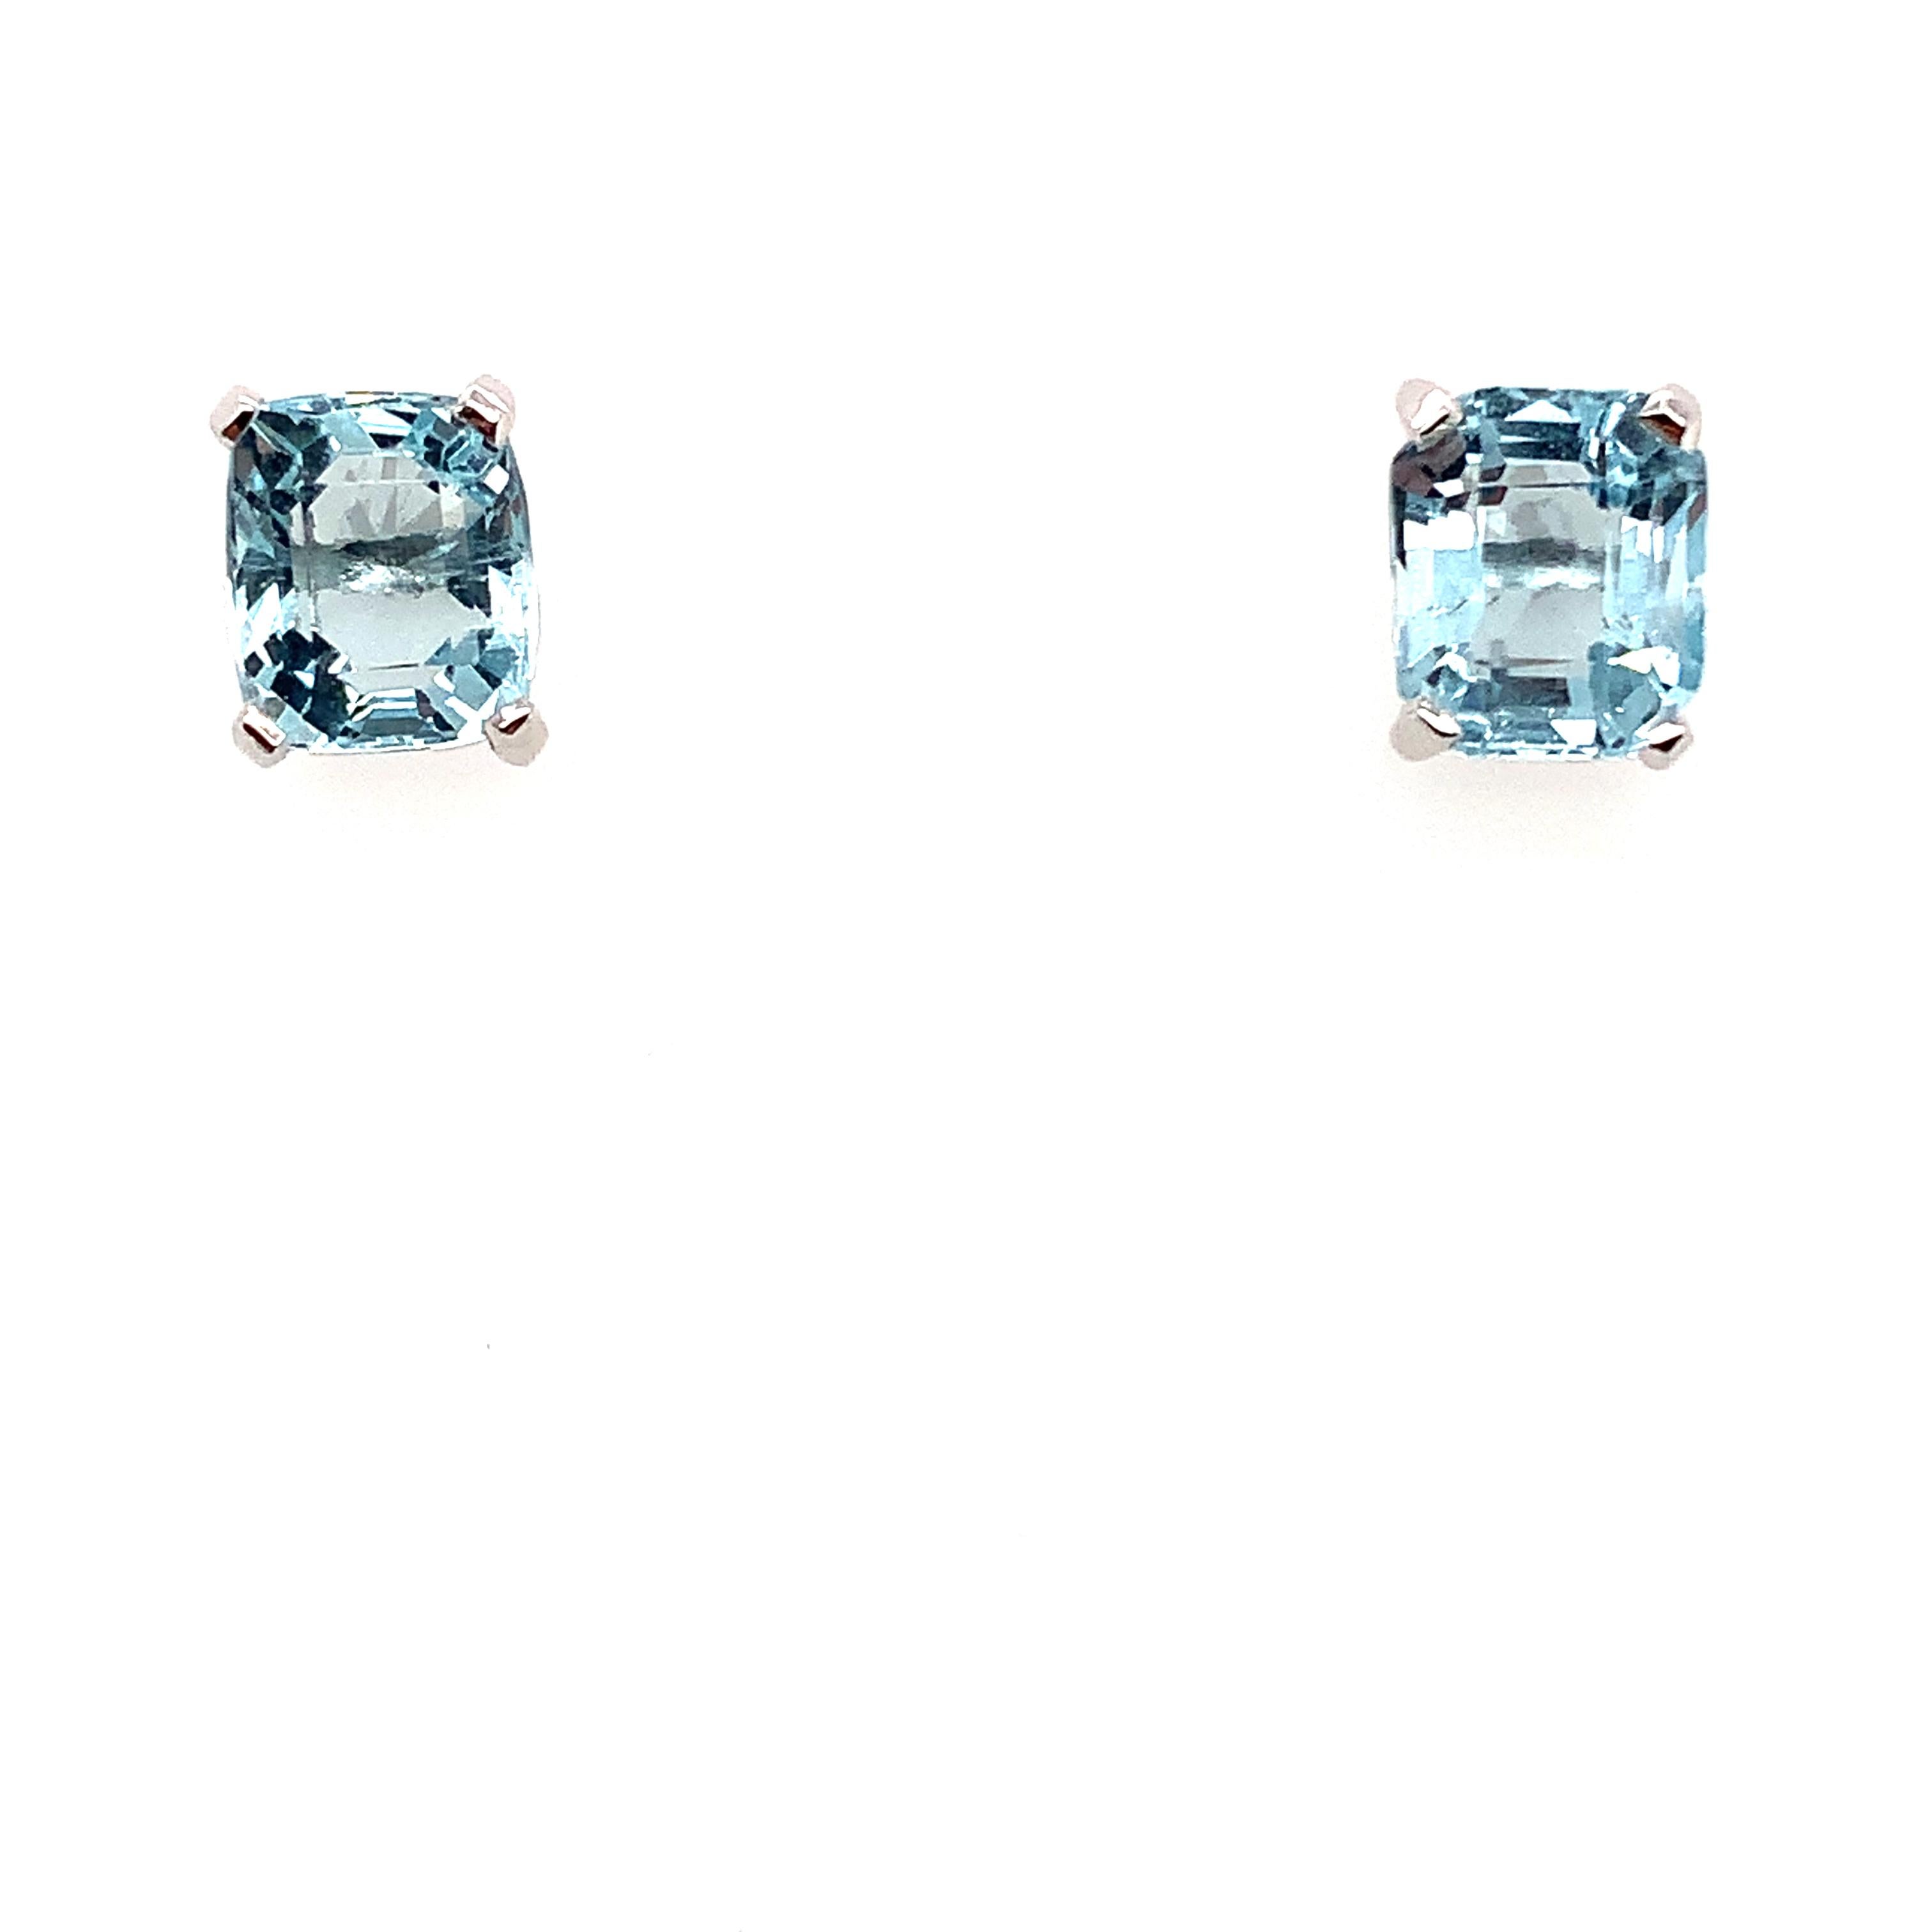 Aquamarine emerald cut solitaire stud earrings 18k white gold In New Condition For Sale In London, GB